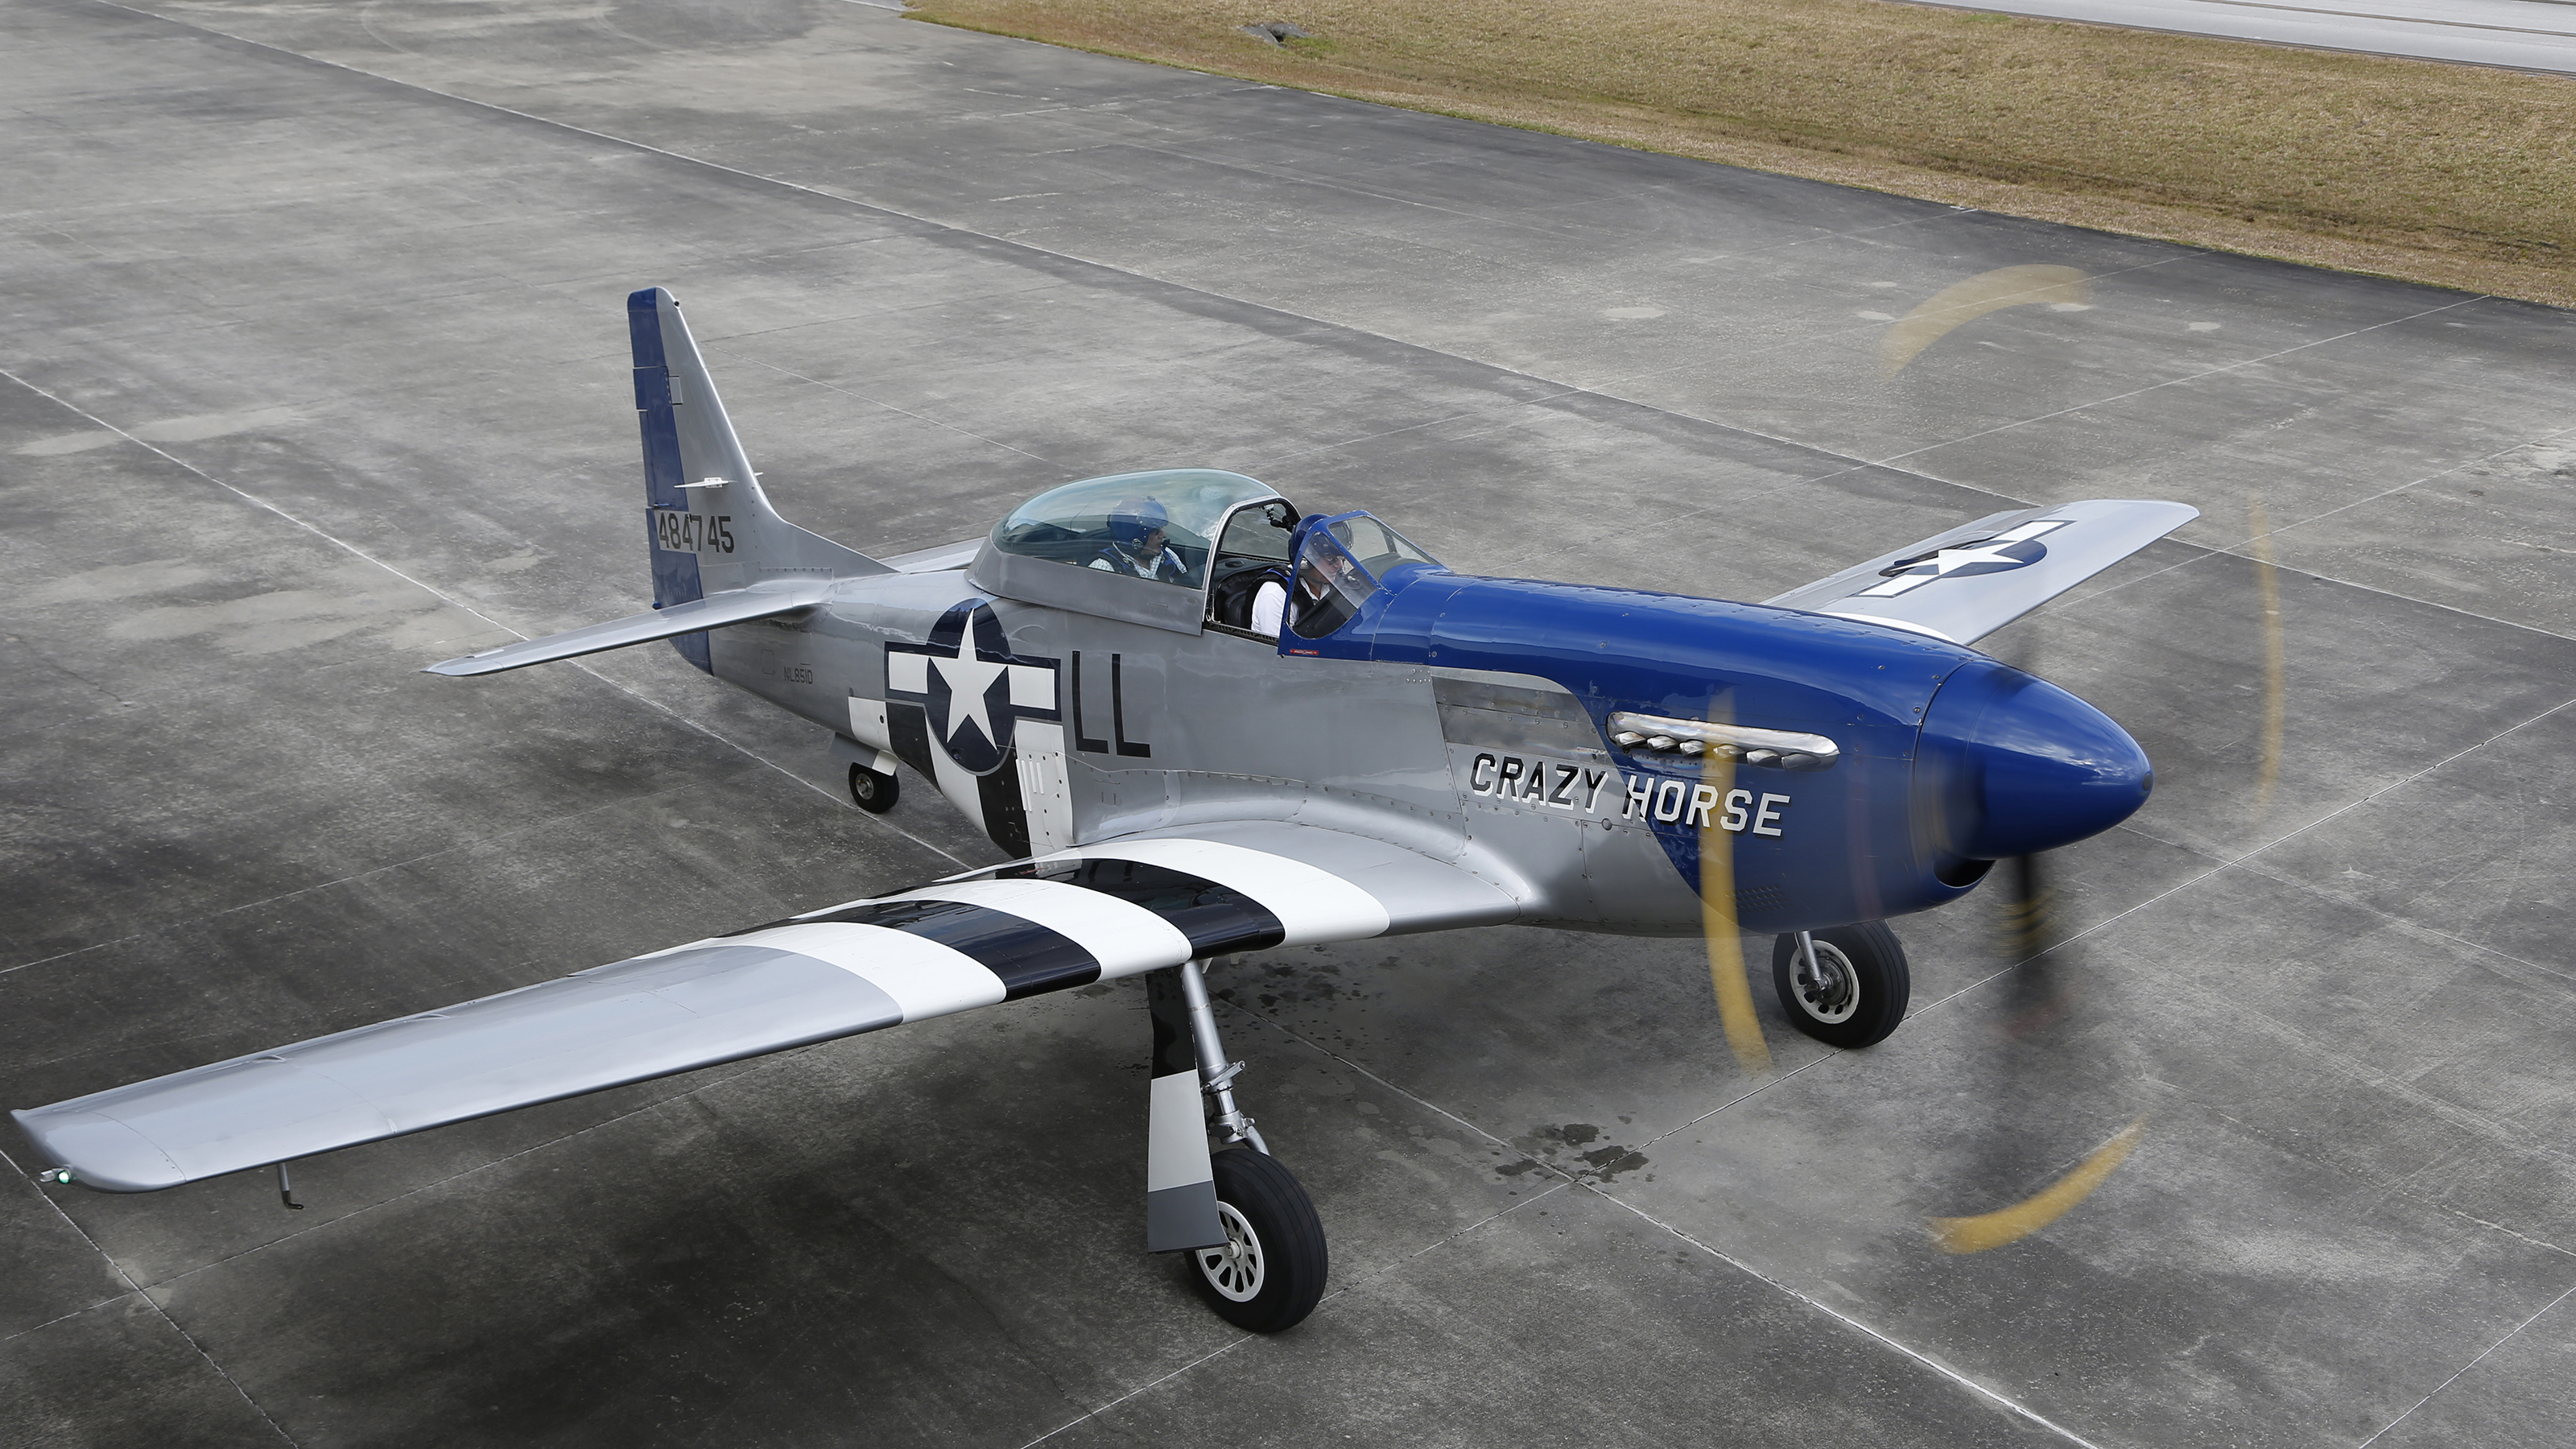 The North American P–51 Mustang "Crazy Horse" is one of the horses in Stallion 51's stable of aircraft available for flight experiences. Photo by Chris Rose.